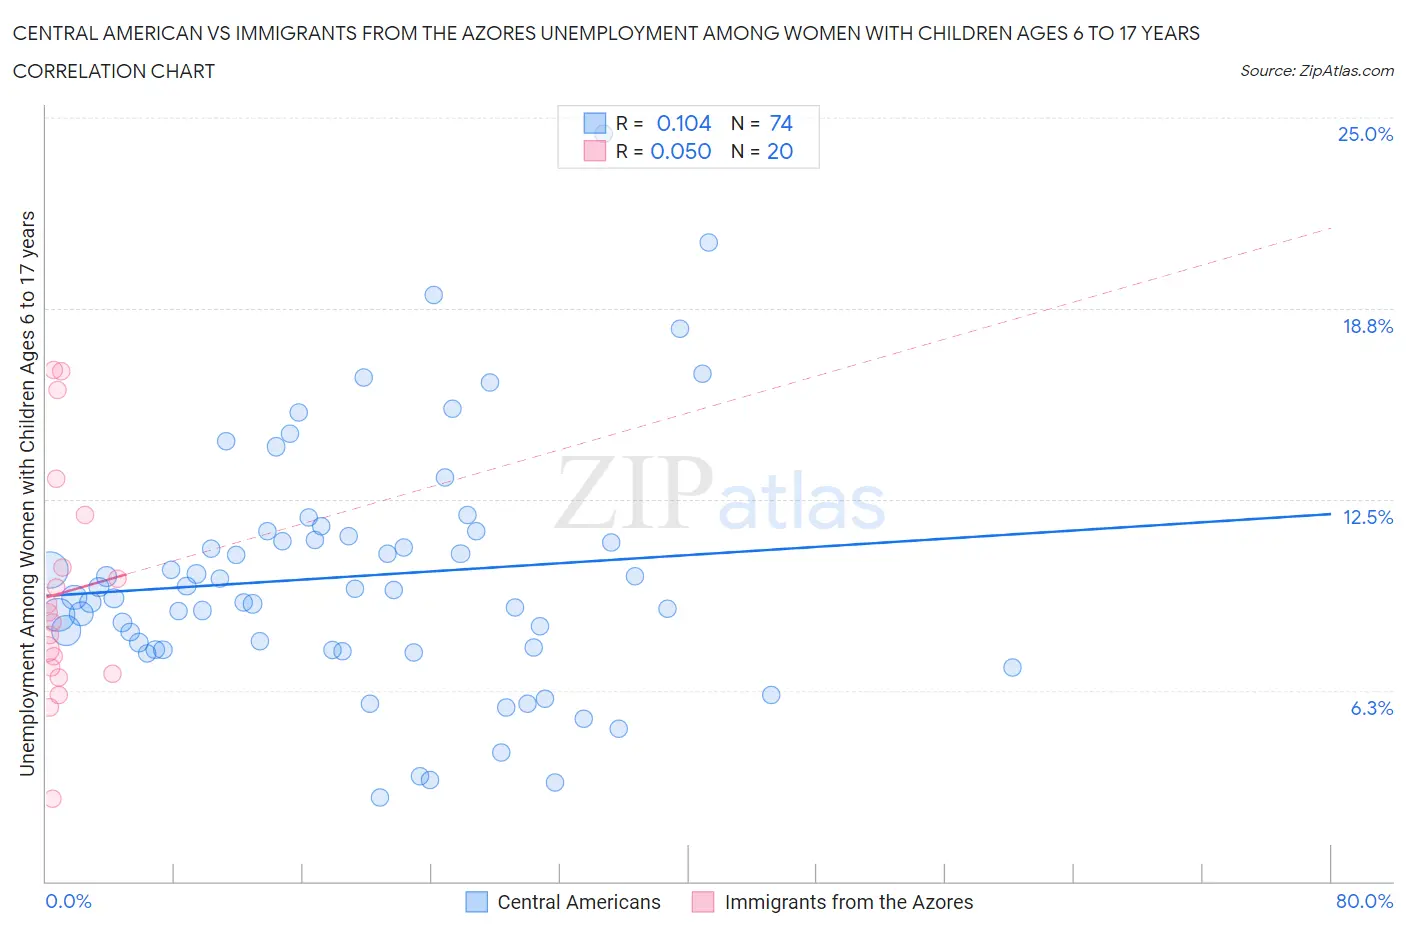 Central American vs Immigrants from the Azores Unemployment Among Women with Children Ages 6 to 17 years